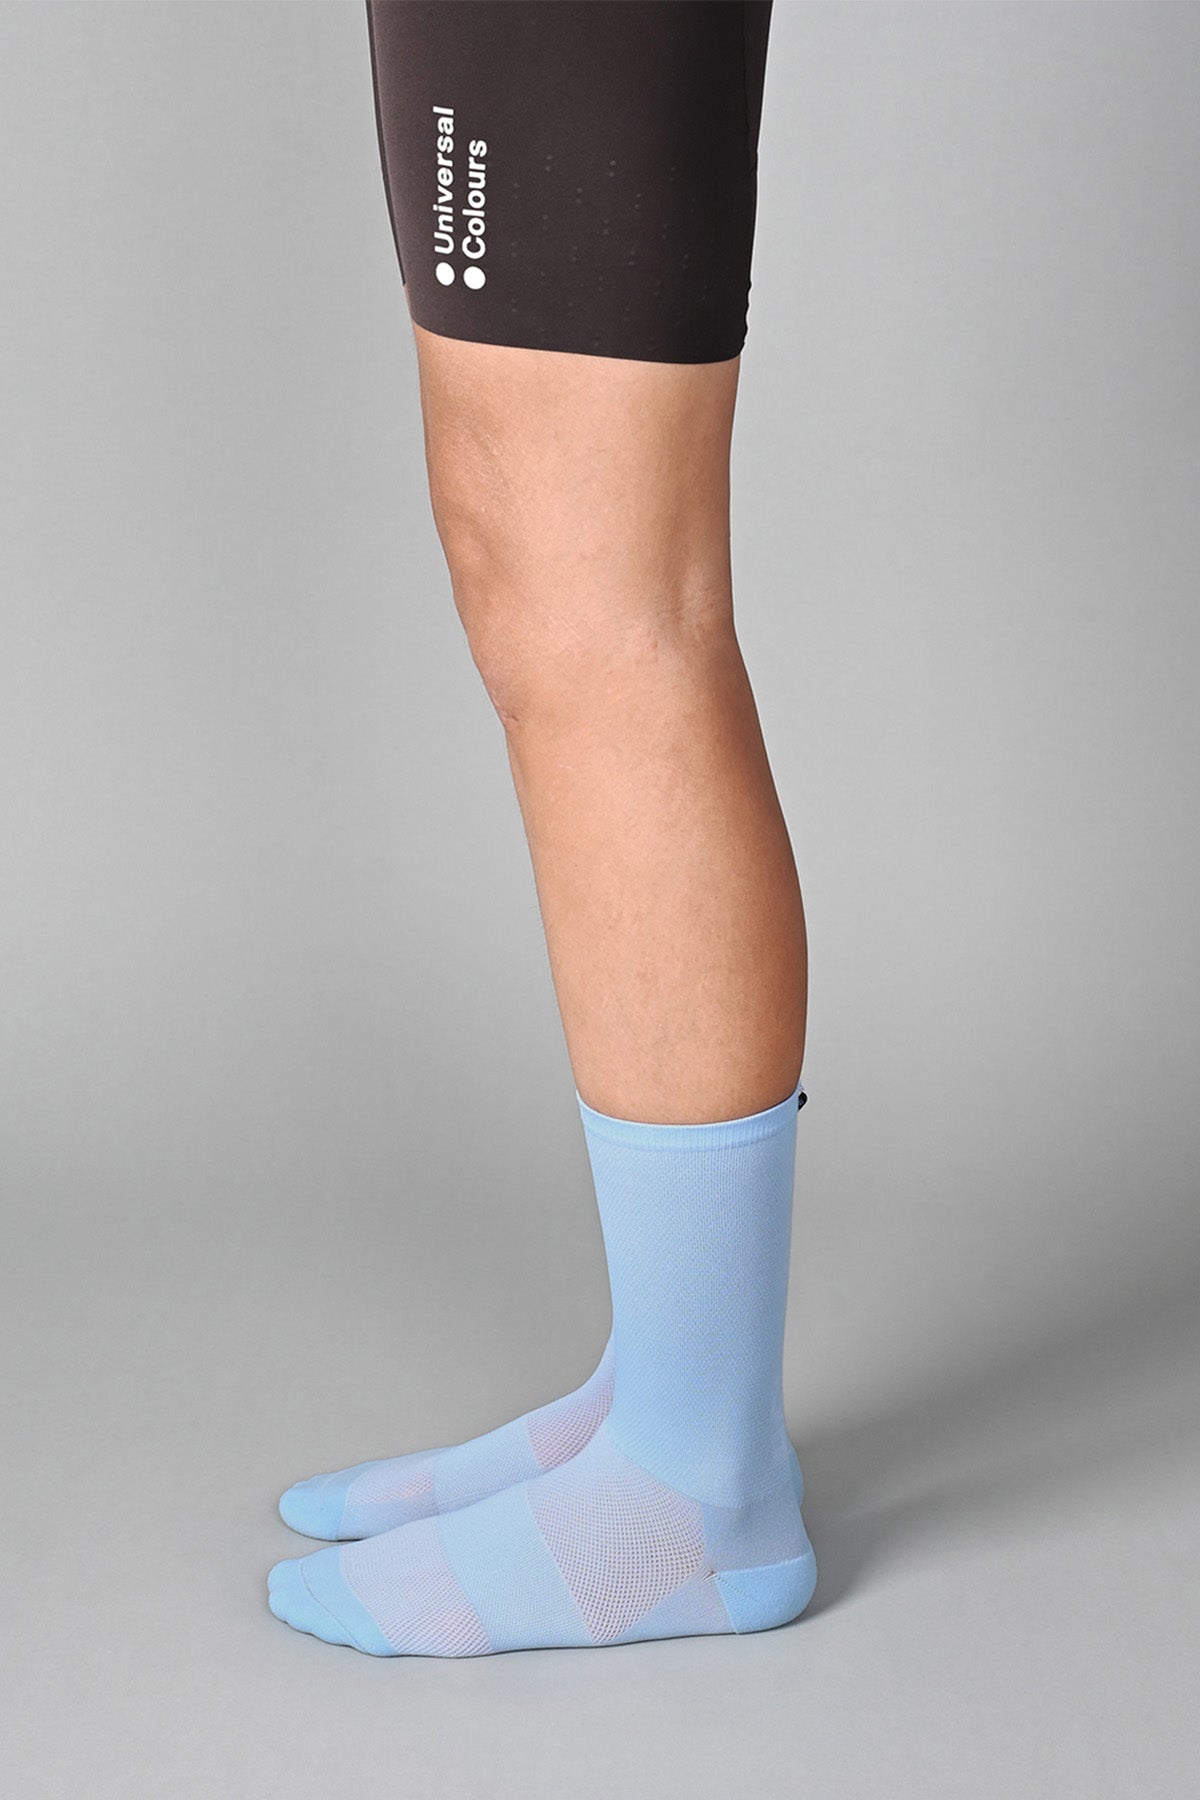 STEALTH - BABY BLUE SIDE | BEST CYCLING SOCKS